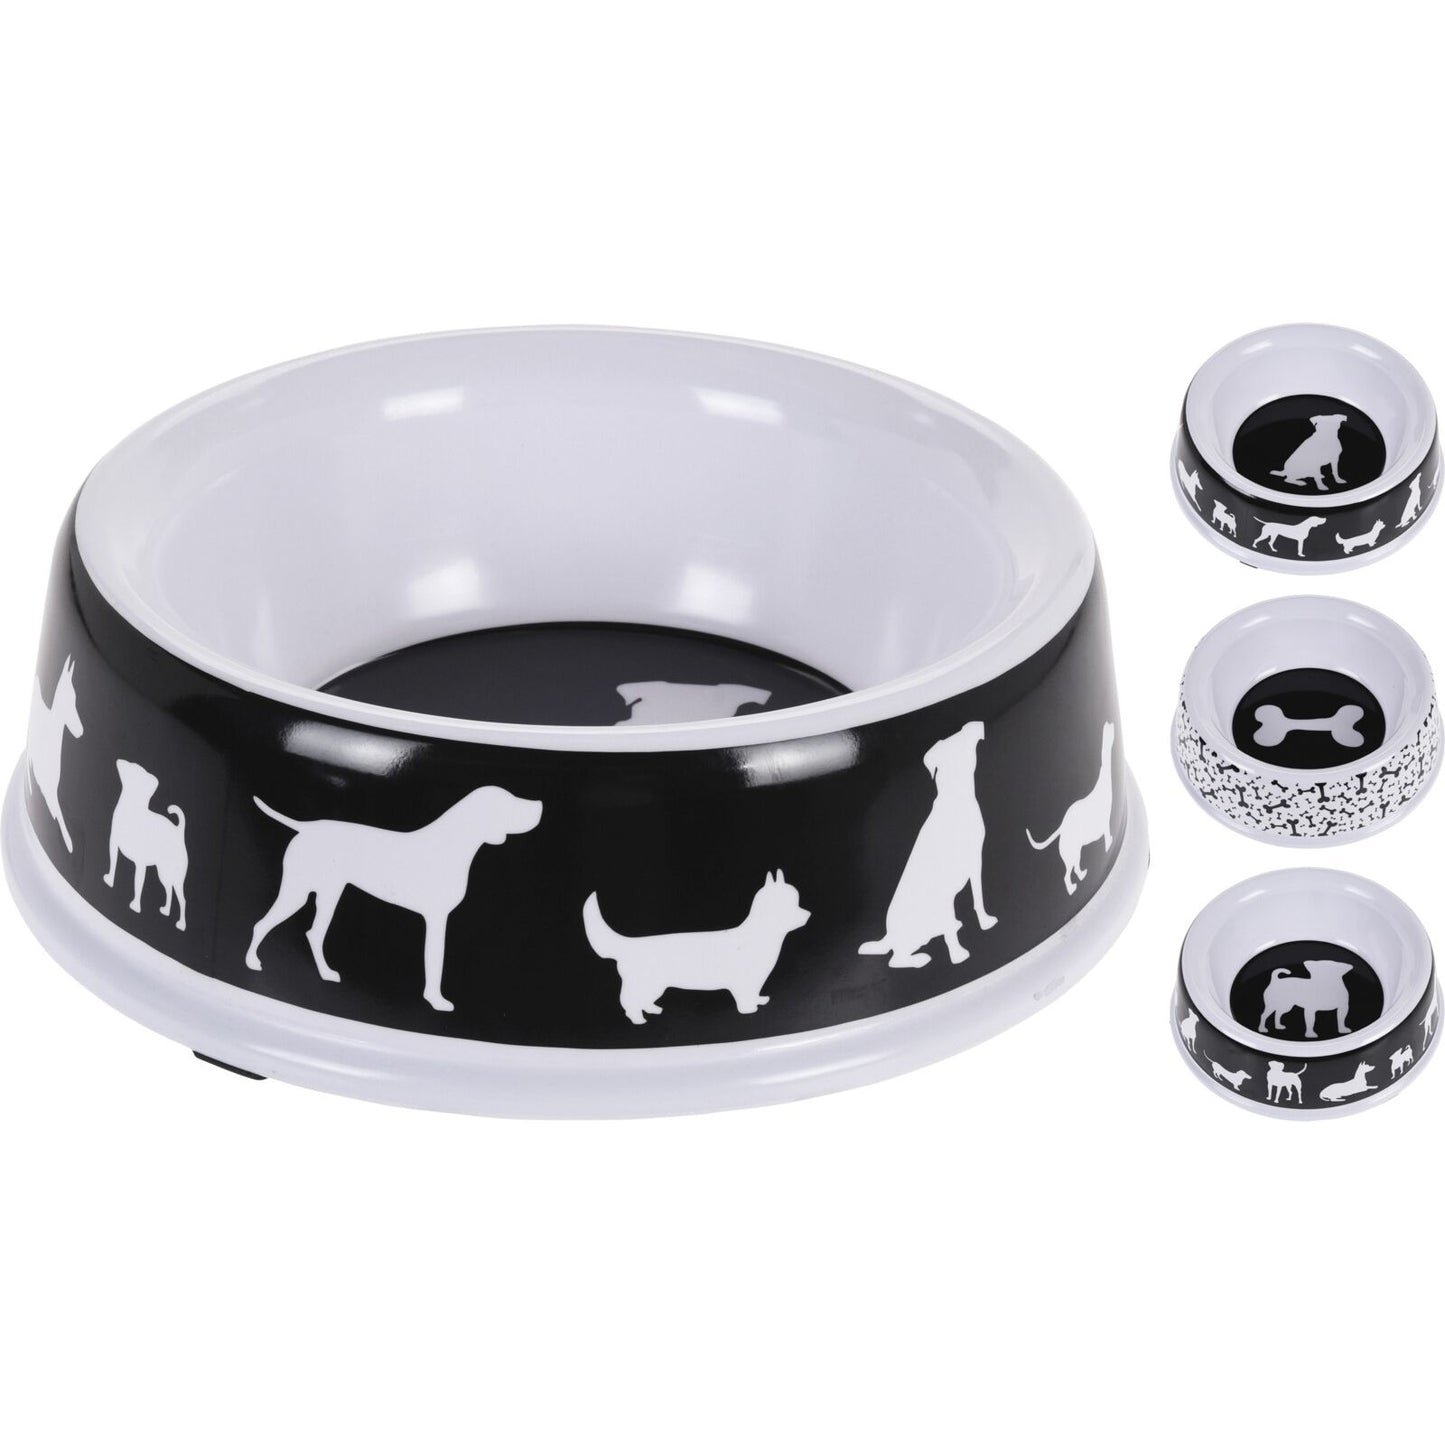 Large Black and White Melamine Dog Food / Water Bowl with Rubber Feet